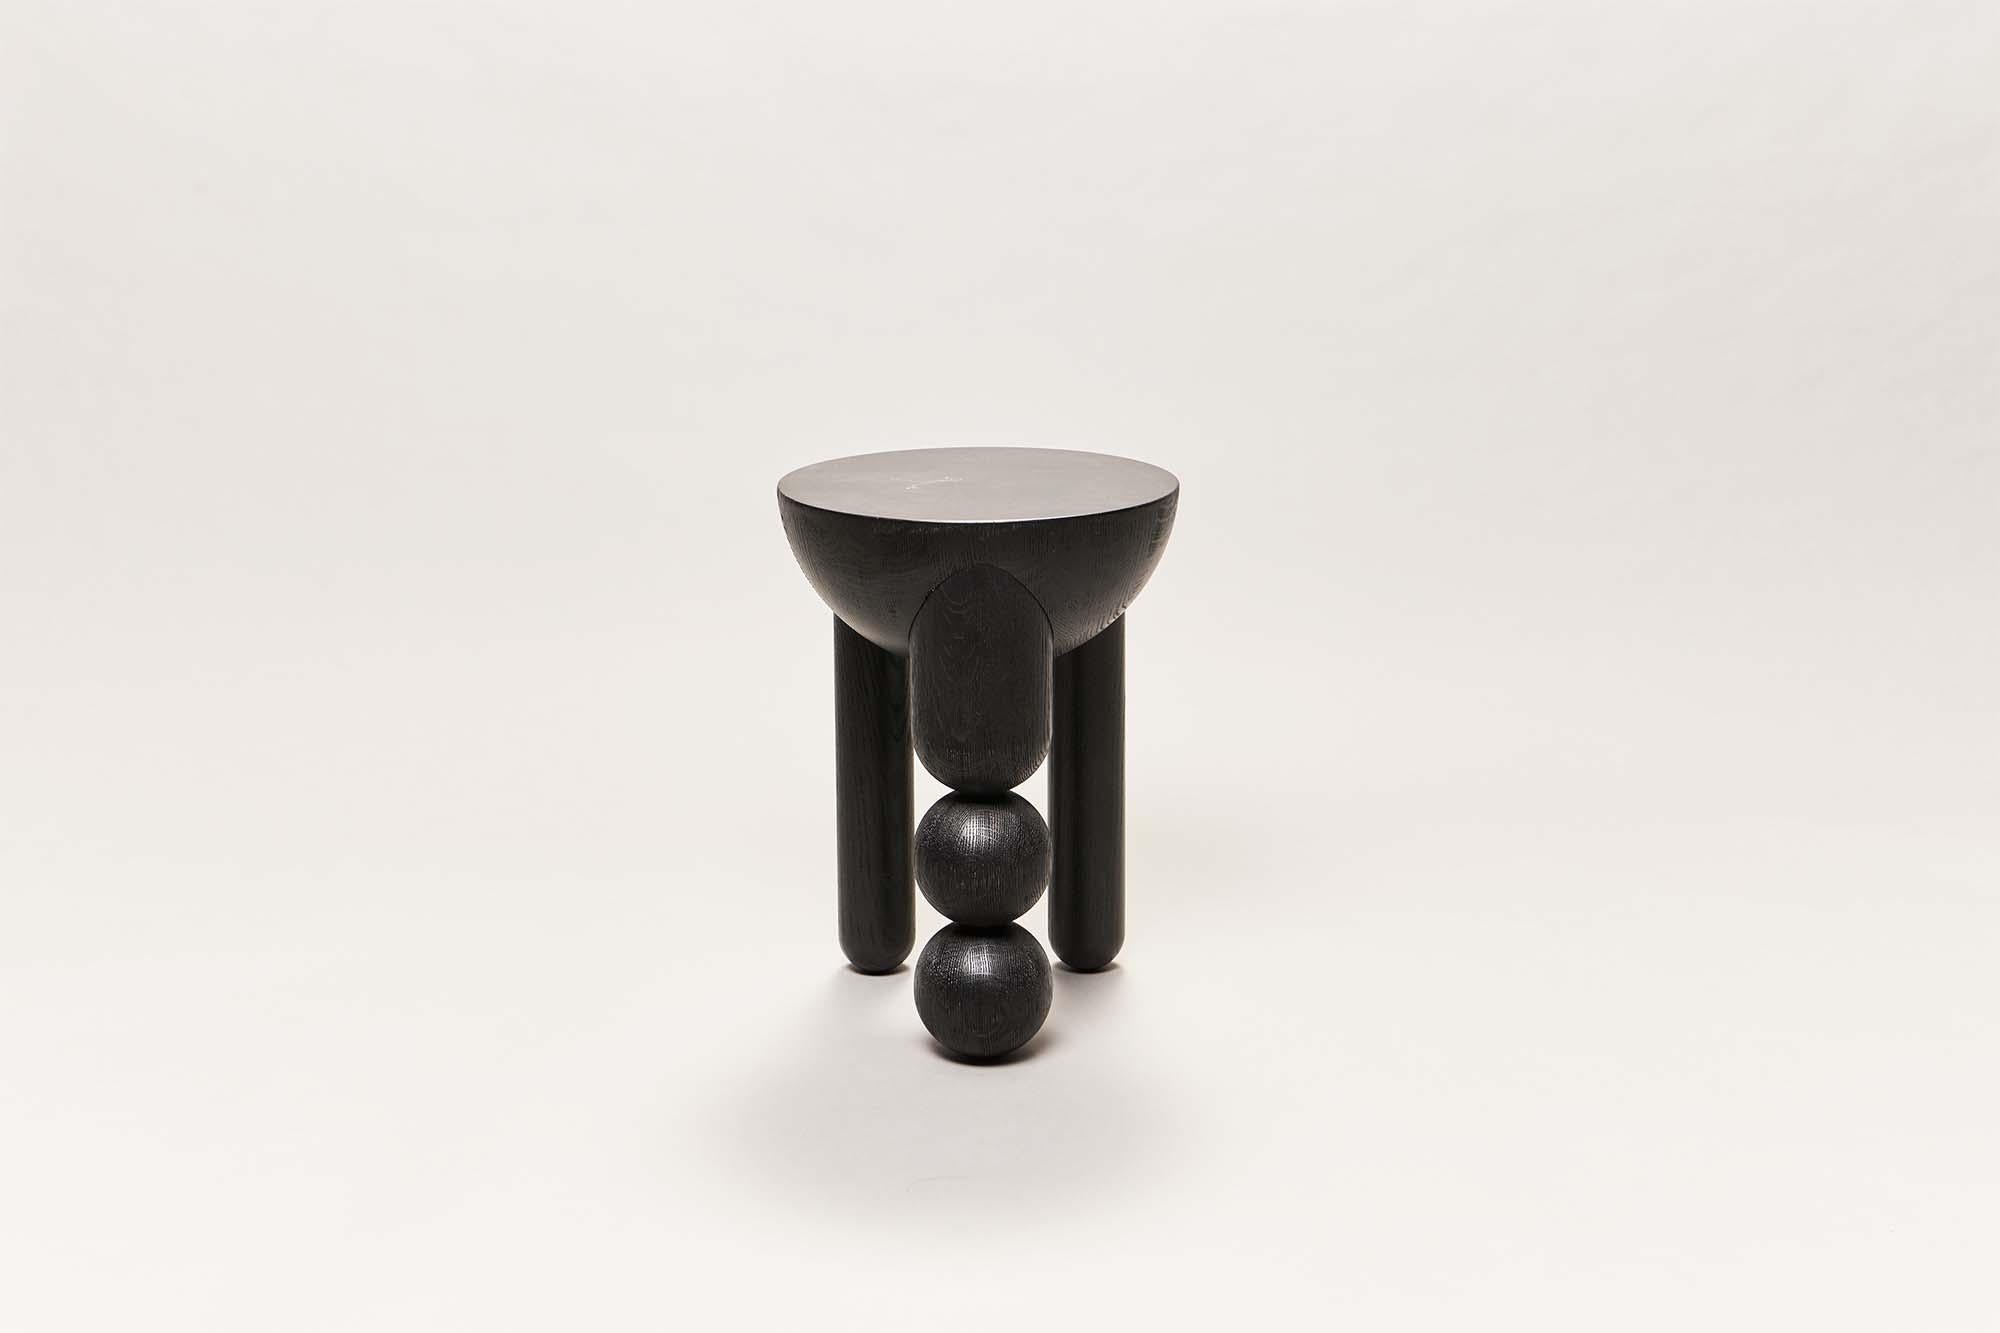 Slovenian Sculptural Profiterole Small Occasional Table, in Black Wood by Lara Bohinc  For Sale